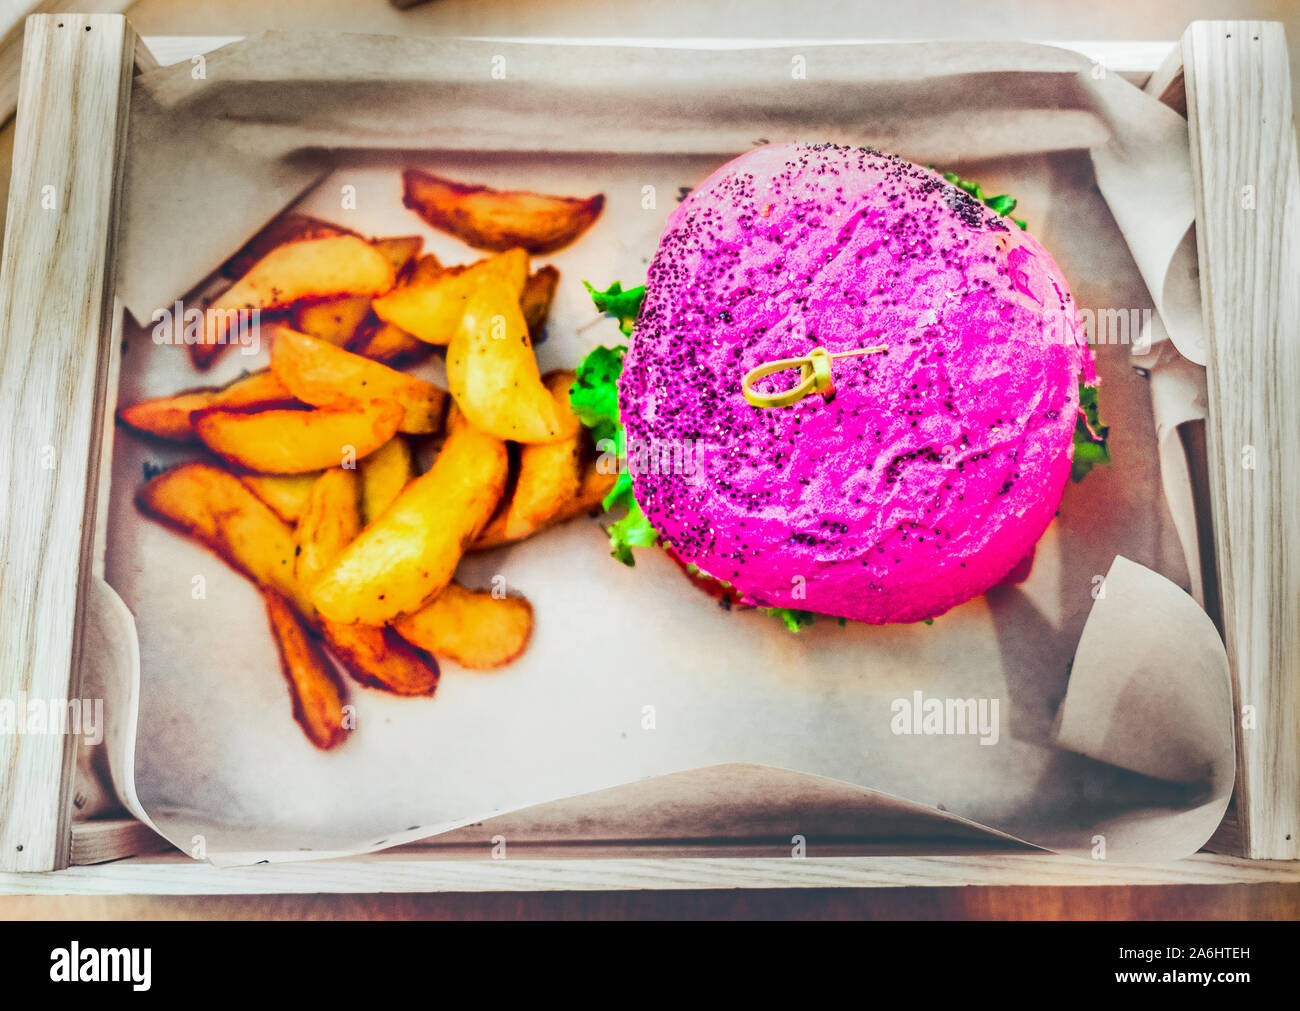 pink burger vegan fast food meal box high angle view of vegetarian with fries from above Stock Photo